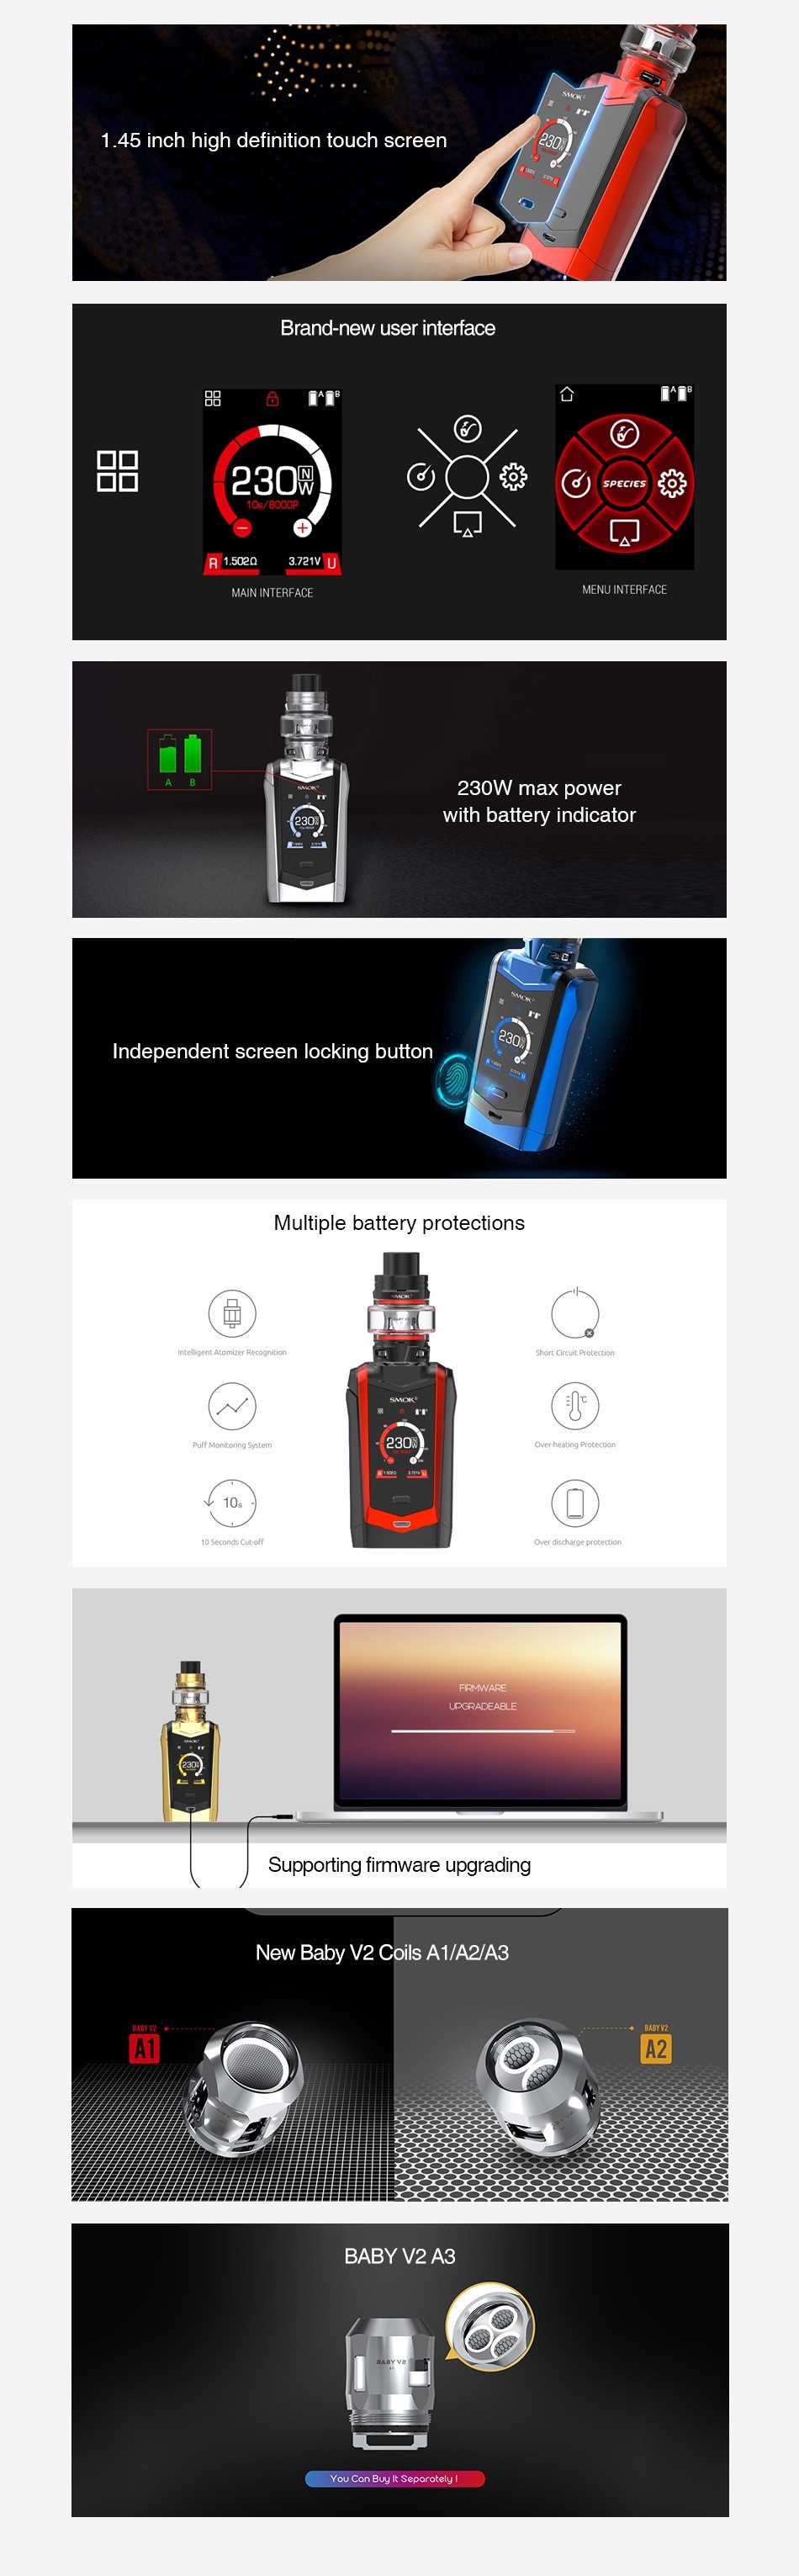 SMOK Species 230W Touch Screen TC Kit with TFV8 Baby V2 1 45 inch high definition touch screen Brandk new user interface     30    R152372U AENU INTERFAC with batto Multiple battery protections Supporting firmware upgrading New Baby v2 Coils A1 A2 A BABY V2 A3